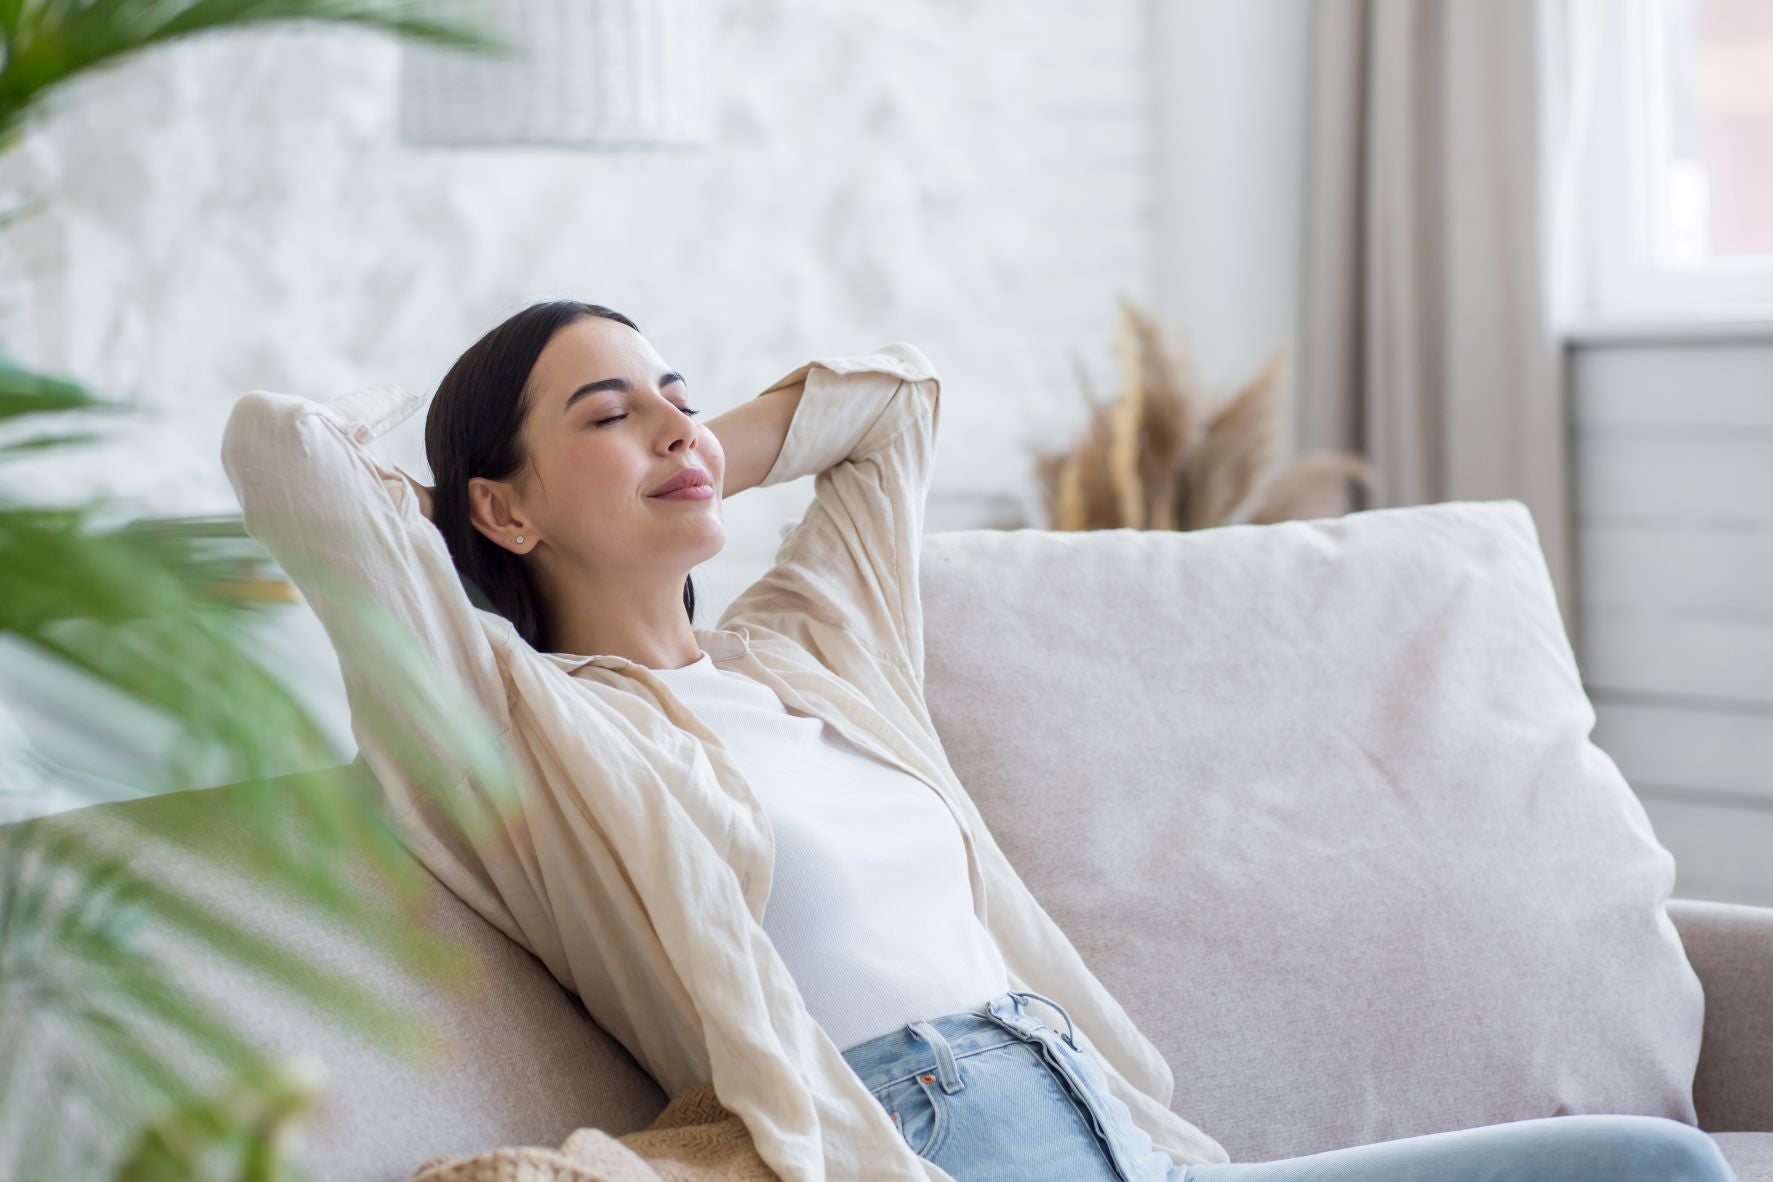 Practice deep breathing before falling asleep; woman practicing breathing techniques before dozing off on couch